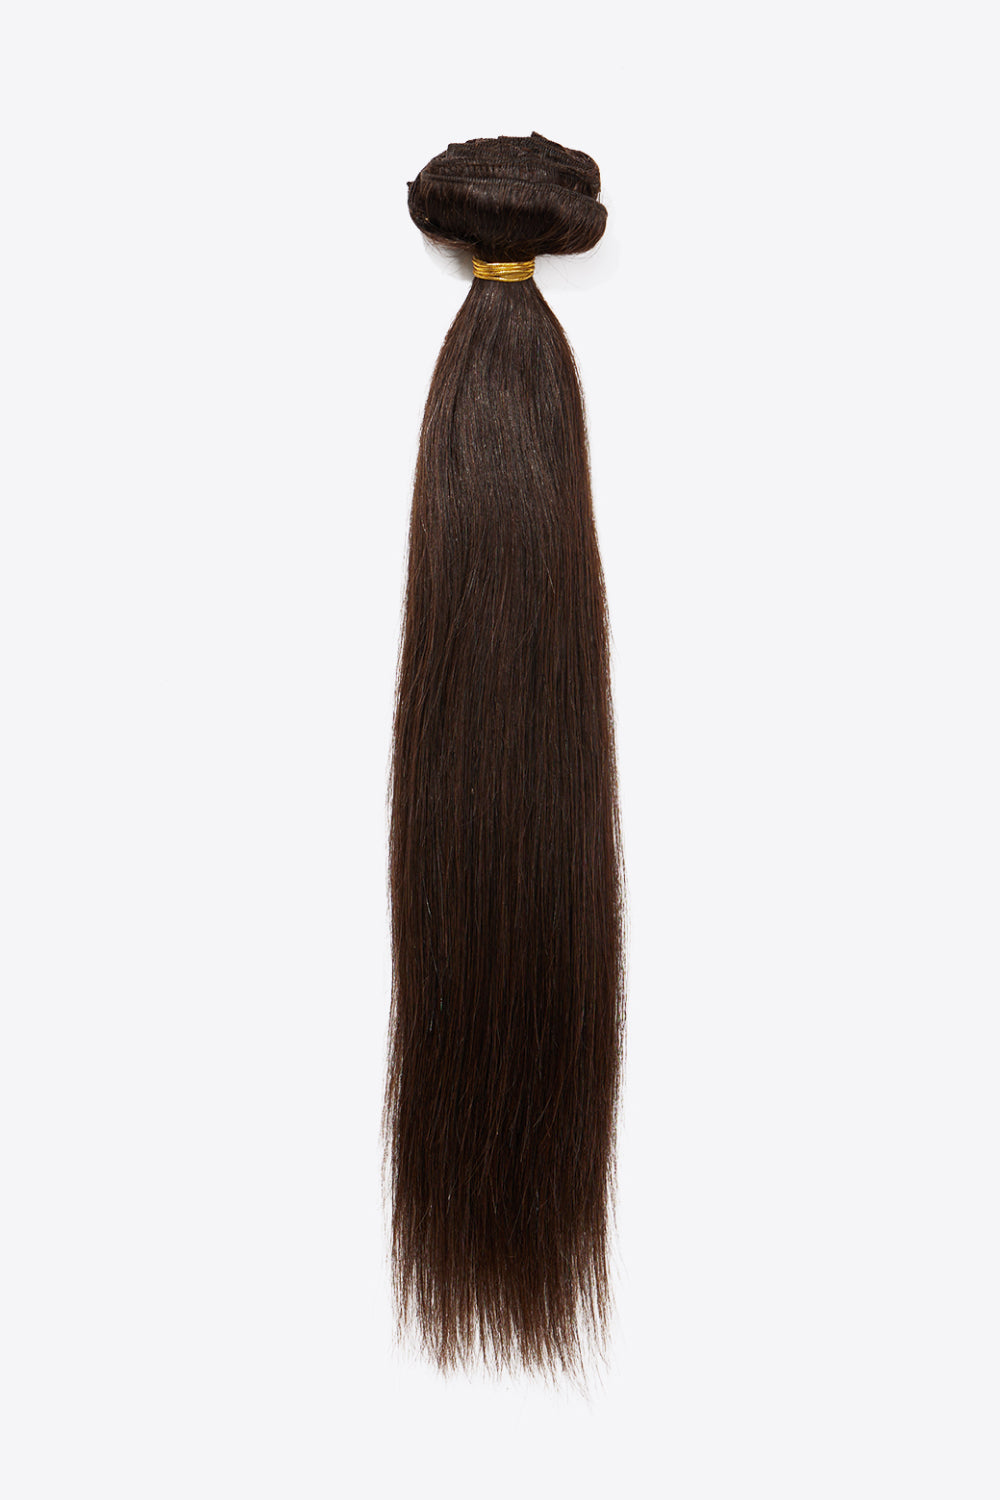 Natural Looking Clip-In Hair Extensions in Chocolate 18